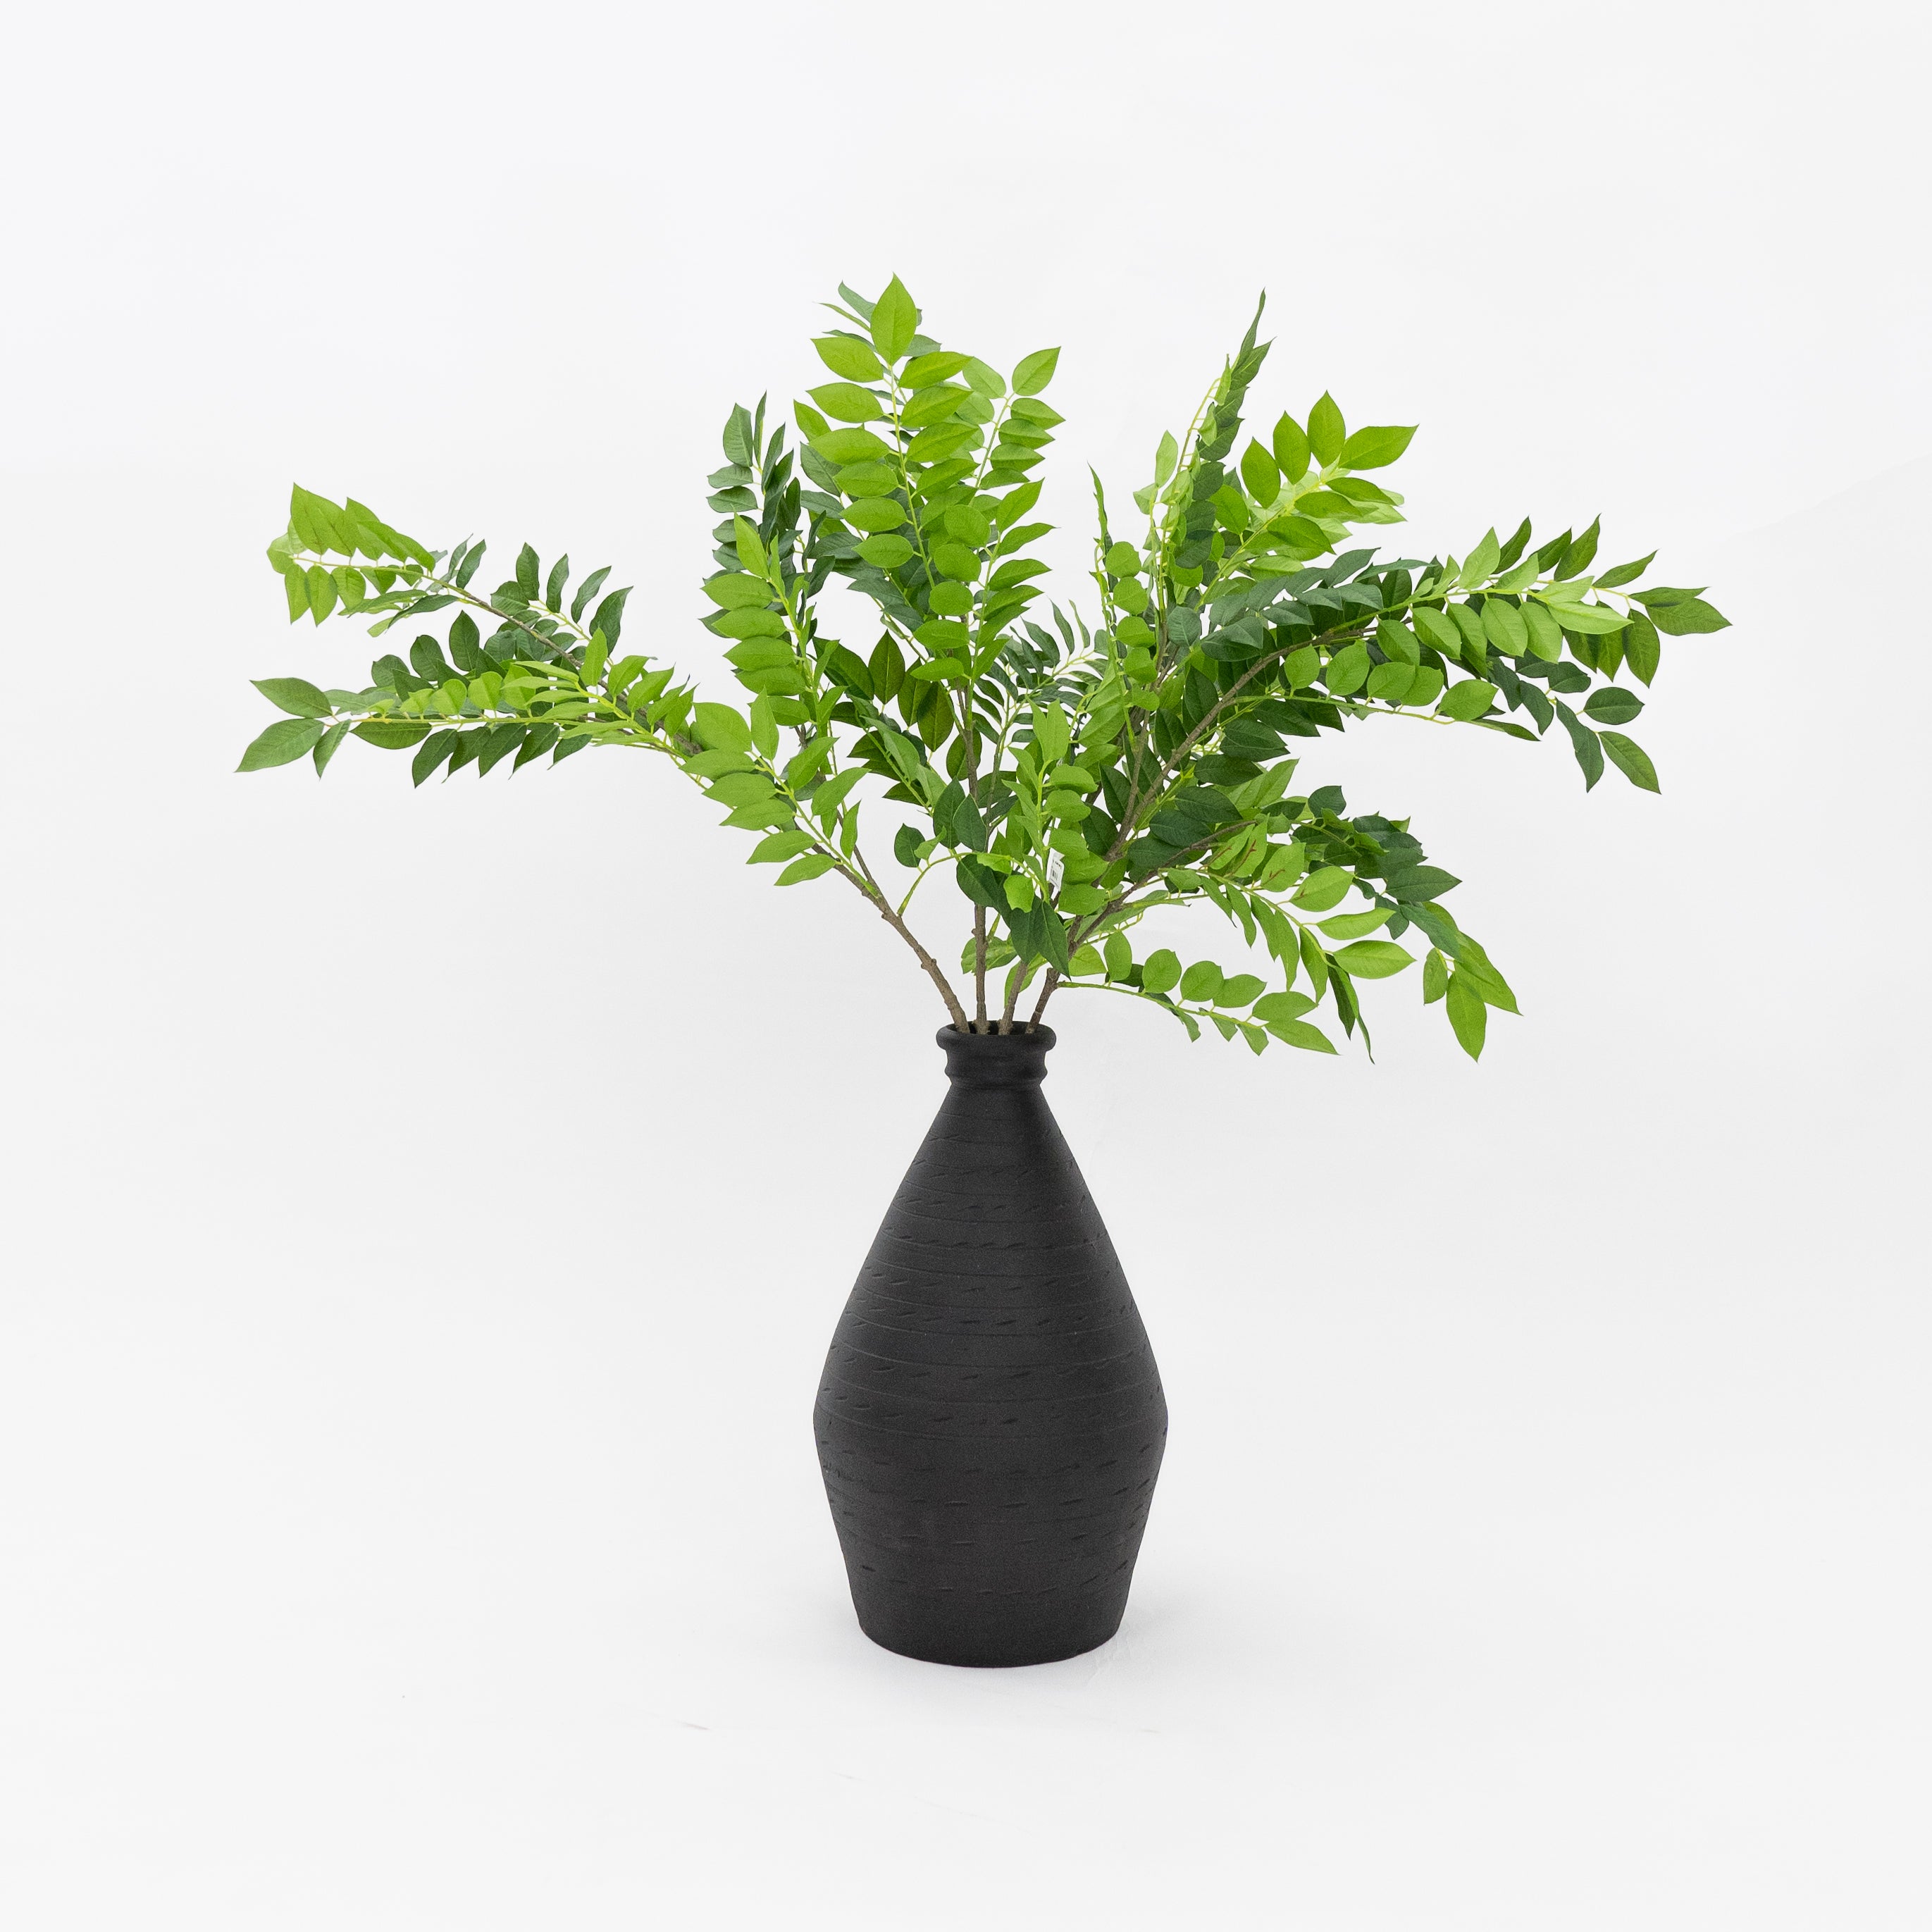 Artificial Plant - Freesia Green  - WS Living - UAE - Artificial Flowers Wood and steel Furnitures - Dubai